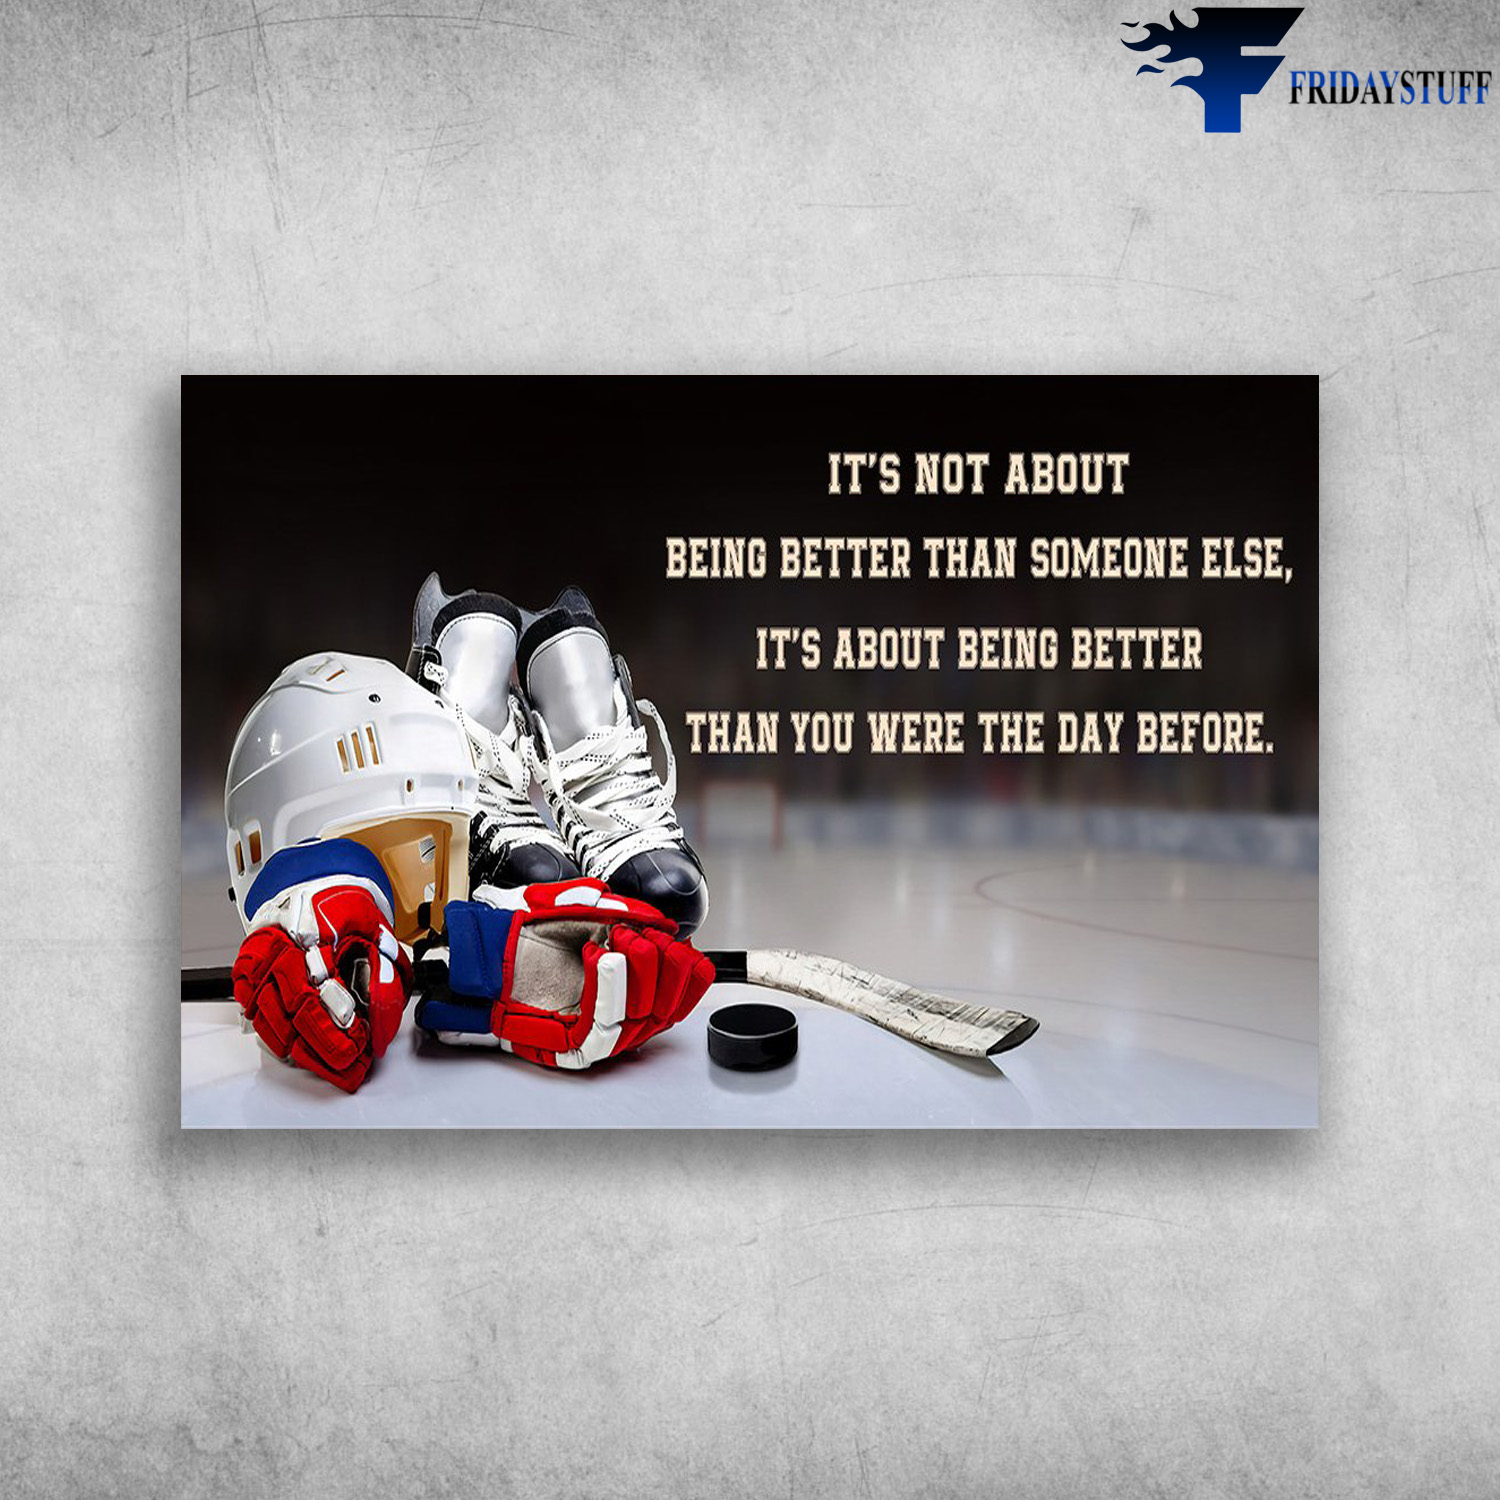 Hockey Tool - It's Not About Being Better Than Someone Else, It's About Being Better Than You Were The Day Before